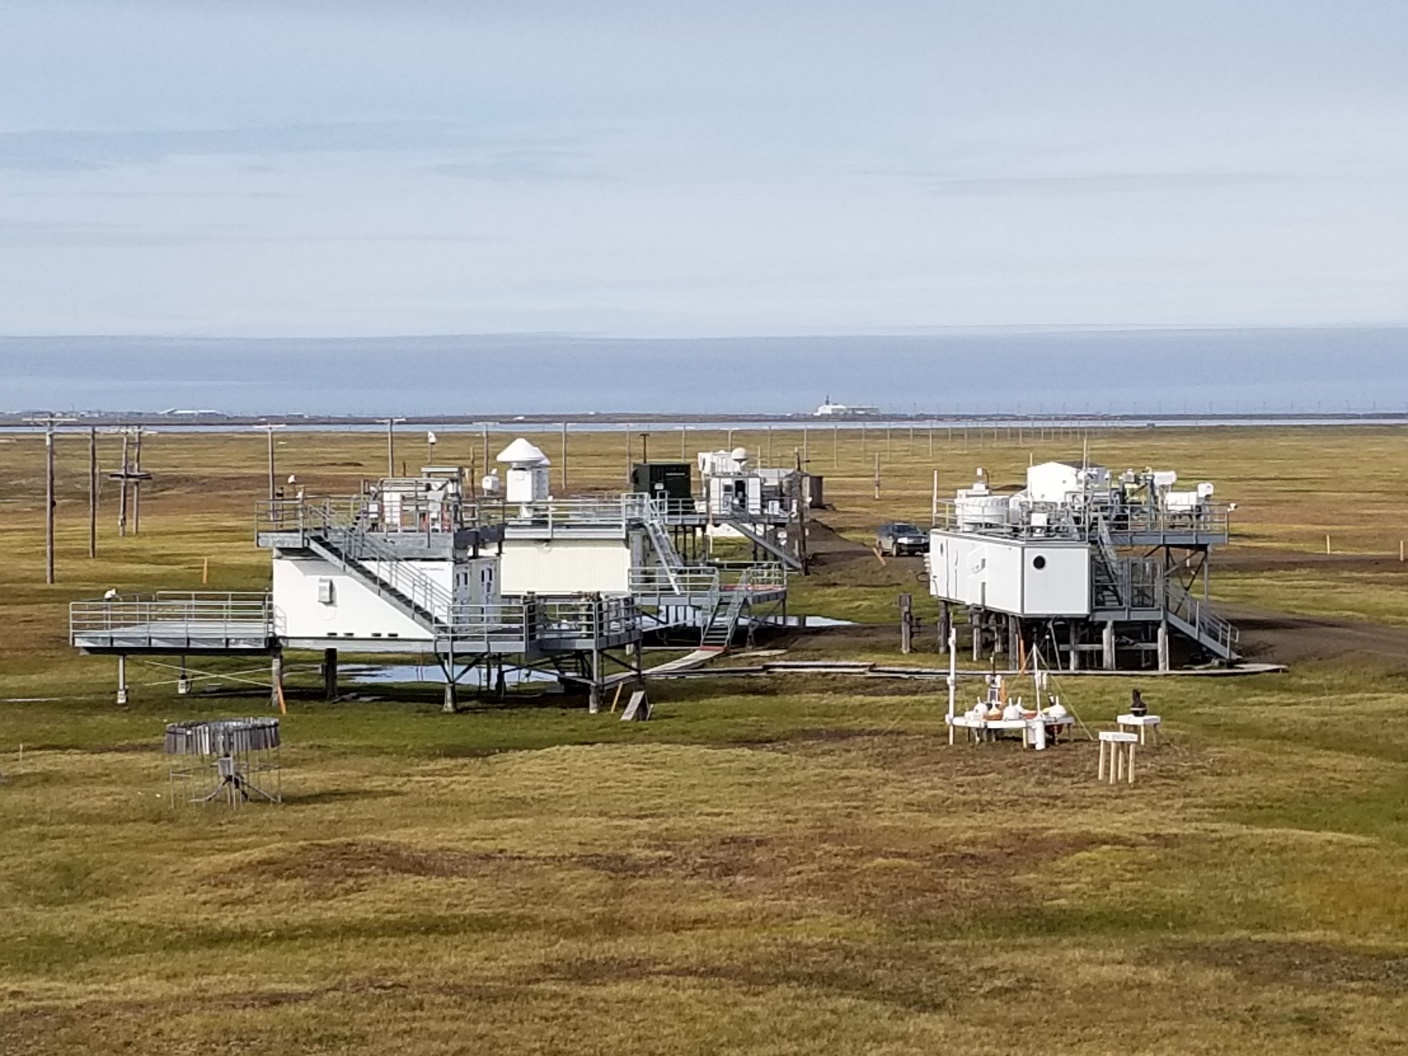 Tundra surrounds the North Slope of Alaska atmospheric observatory.